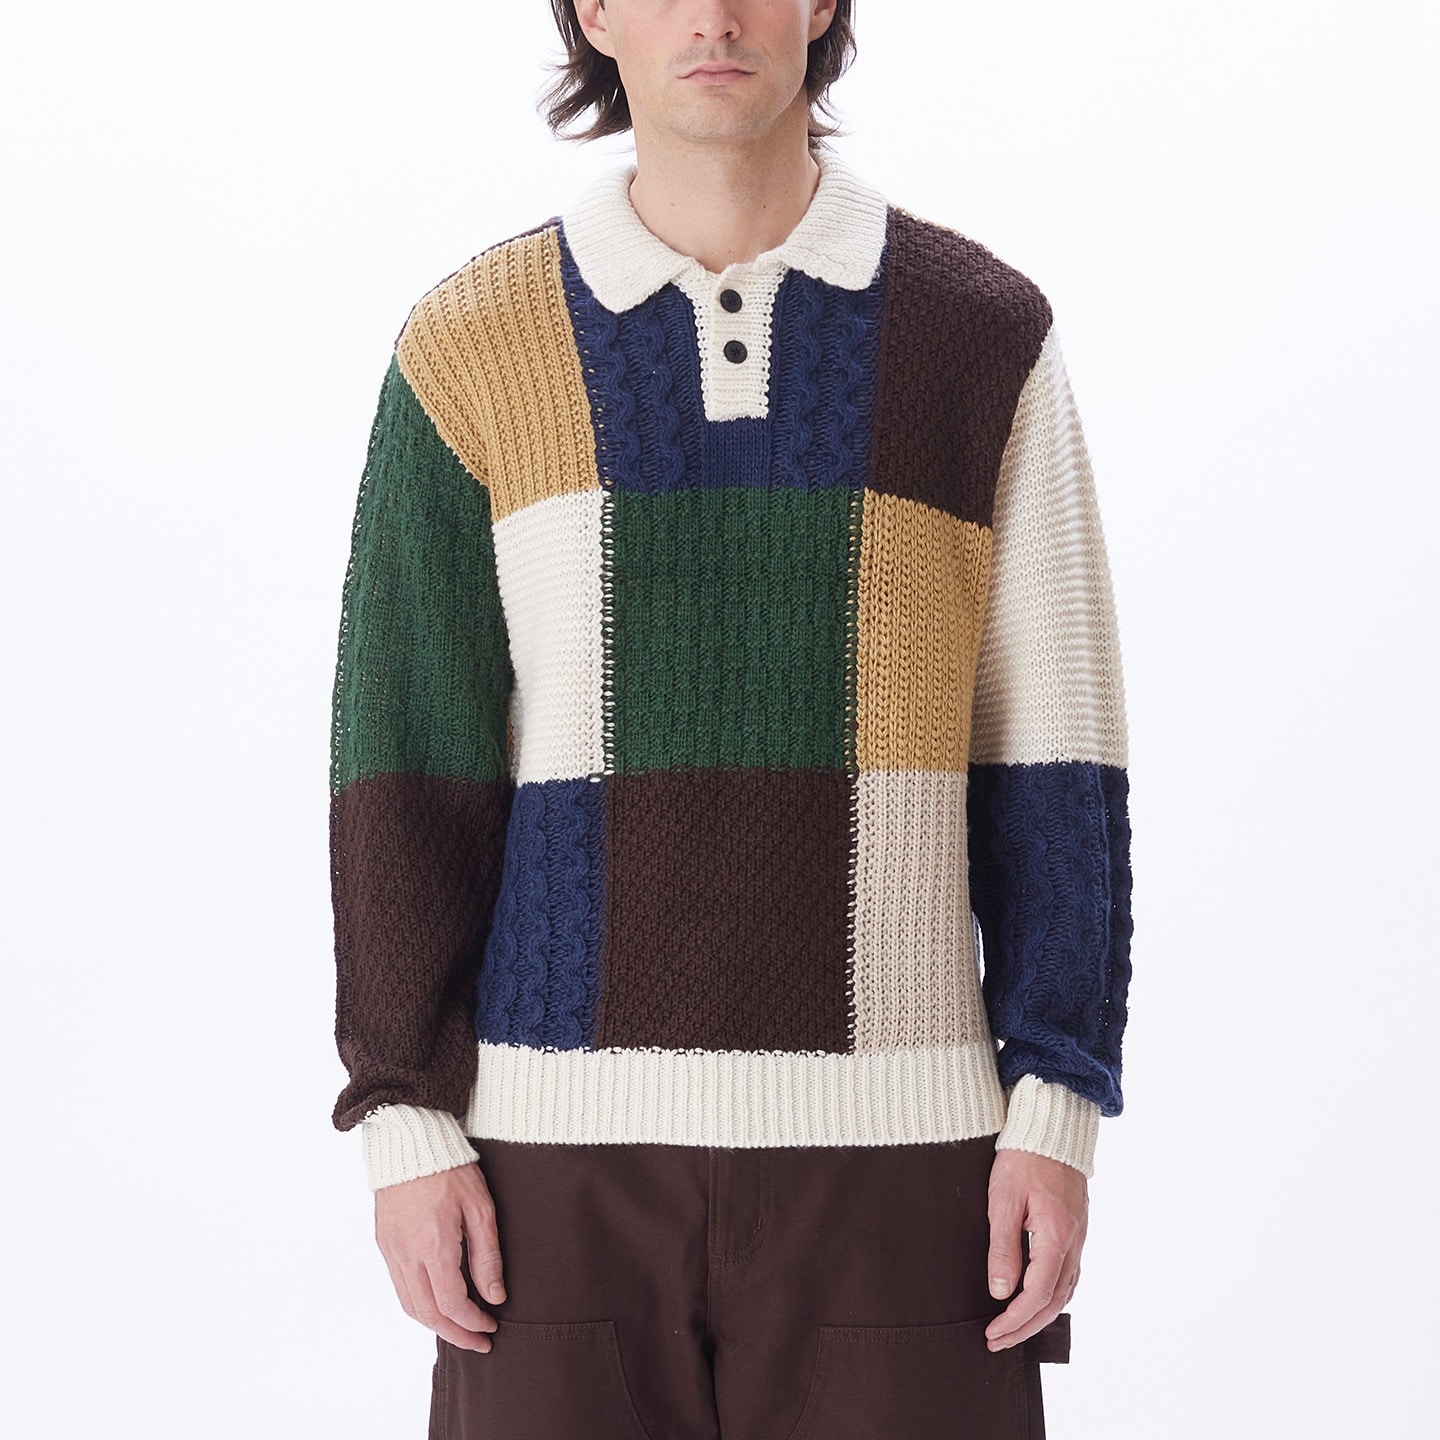 OBEY/オベイ】OLIVER PATCHWORK SWEATER UNBLEACHED MULTI 151000074 M